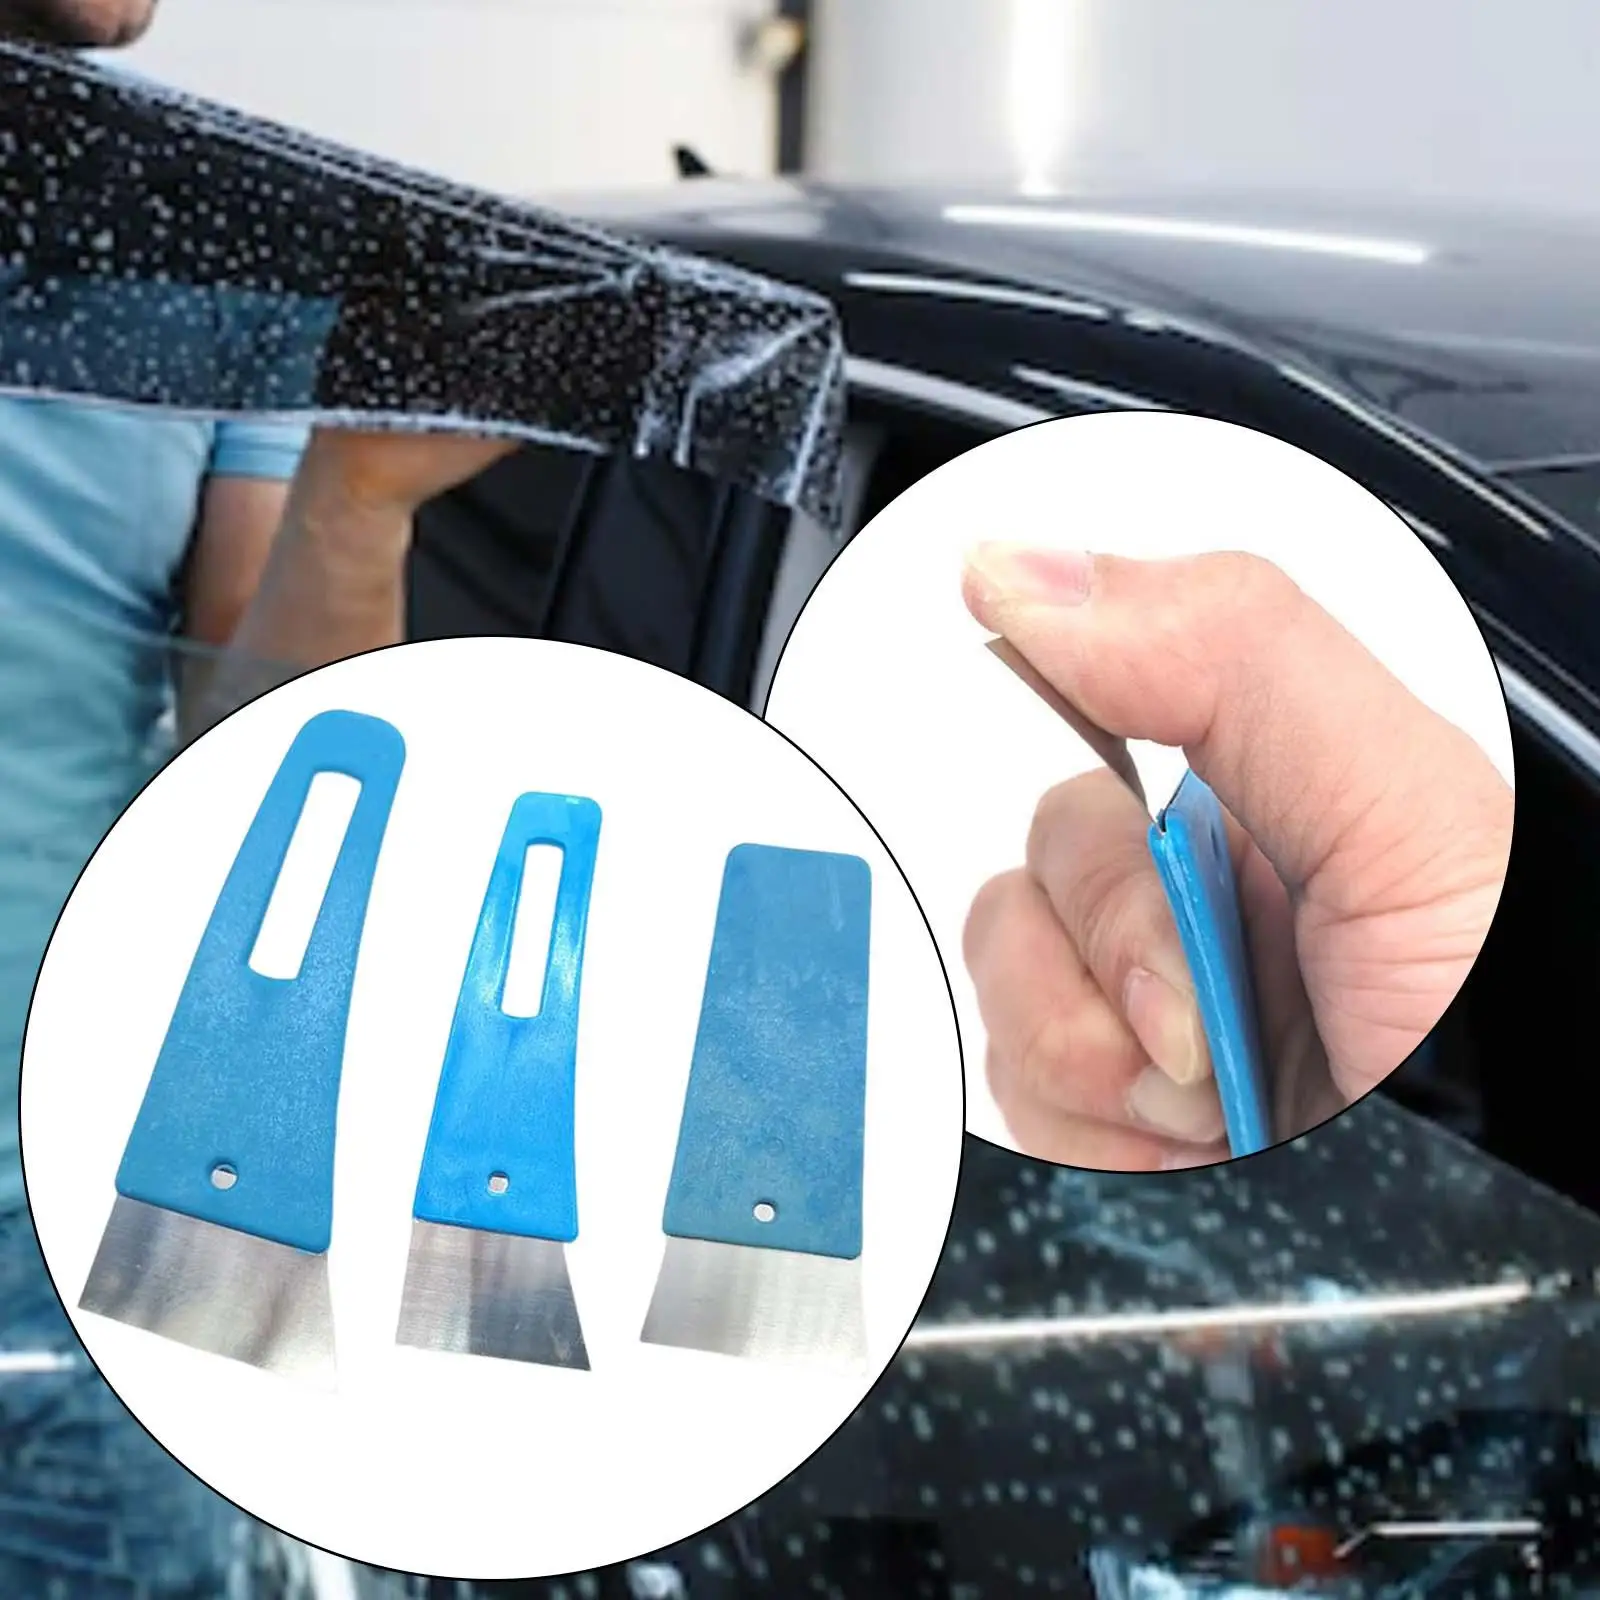 3 Pieces Car Window Film Scraper Squeegee Set Pushing Out Bubble Lines Improving Efficiency Cleaning Durable Comfortable Grip